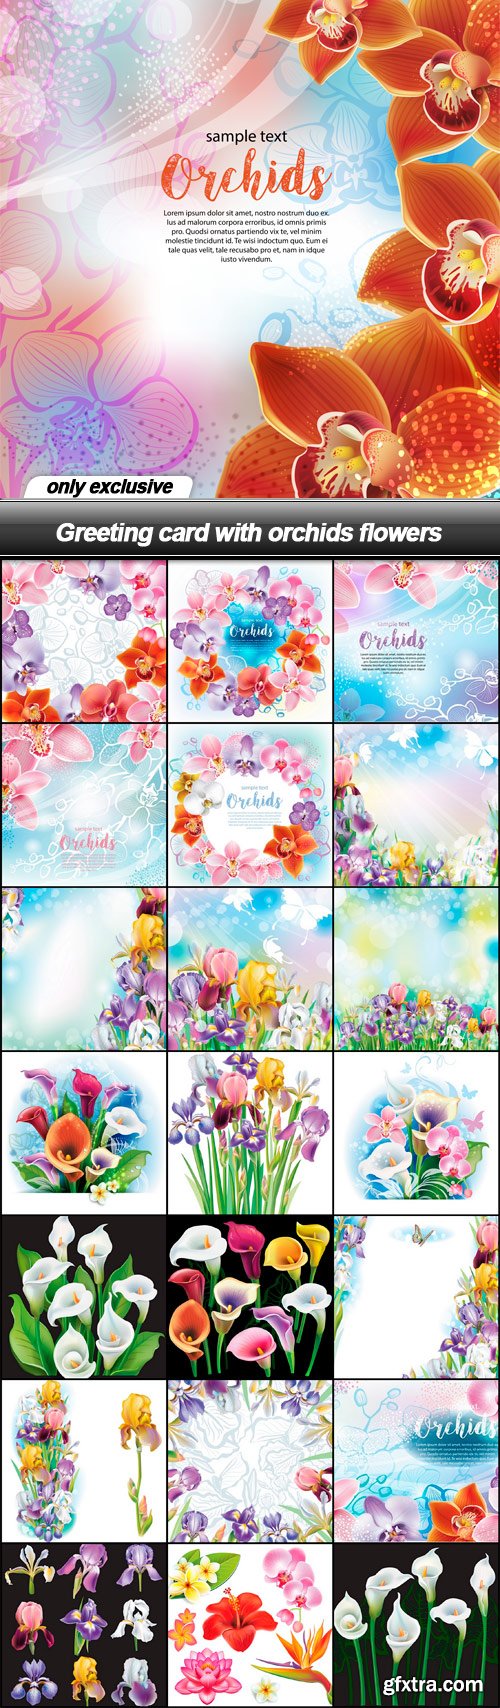 Greeting card with orchids flowers - 22 EPS